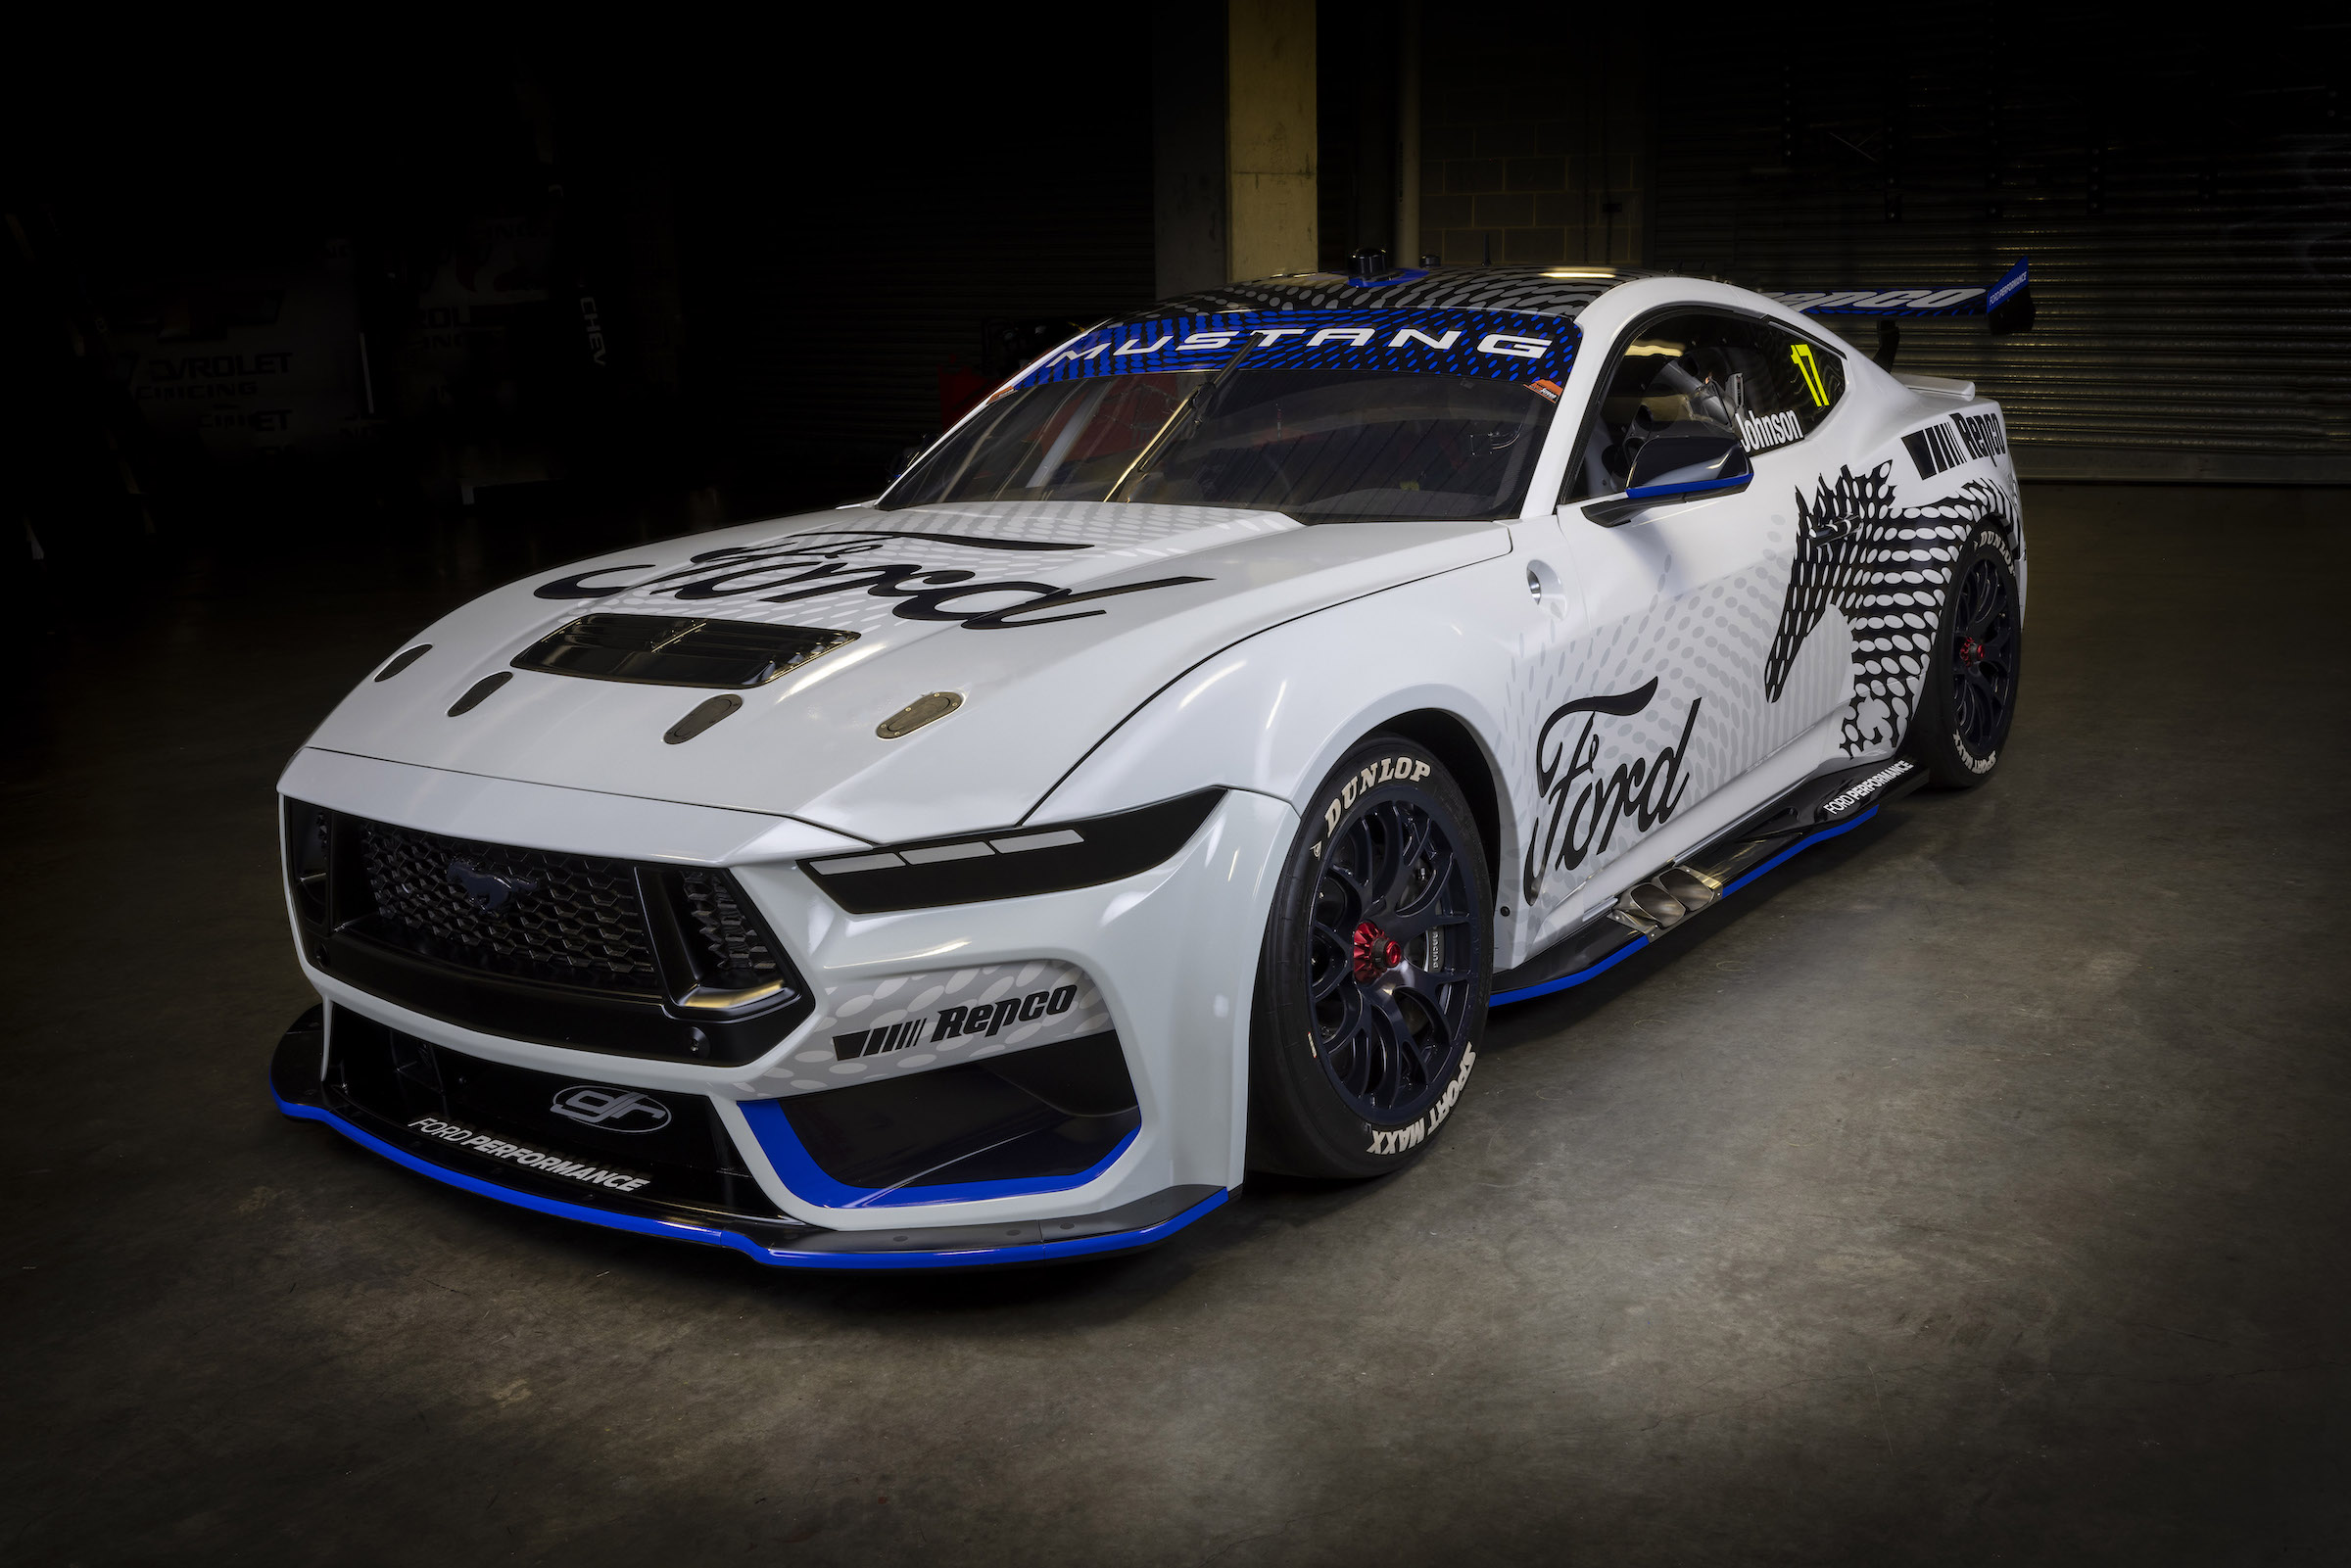 S650 Mustang All-New Ford Mustang (S650) GT Supercars Race Car Revealed at Bathurst 1000 ev-11-22-1j1a0622-